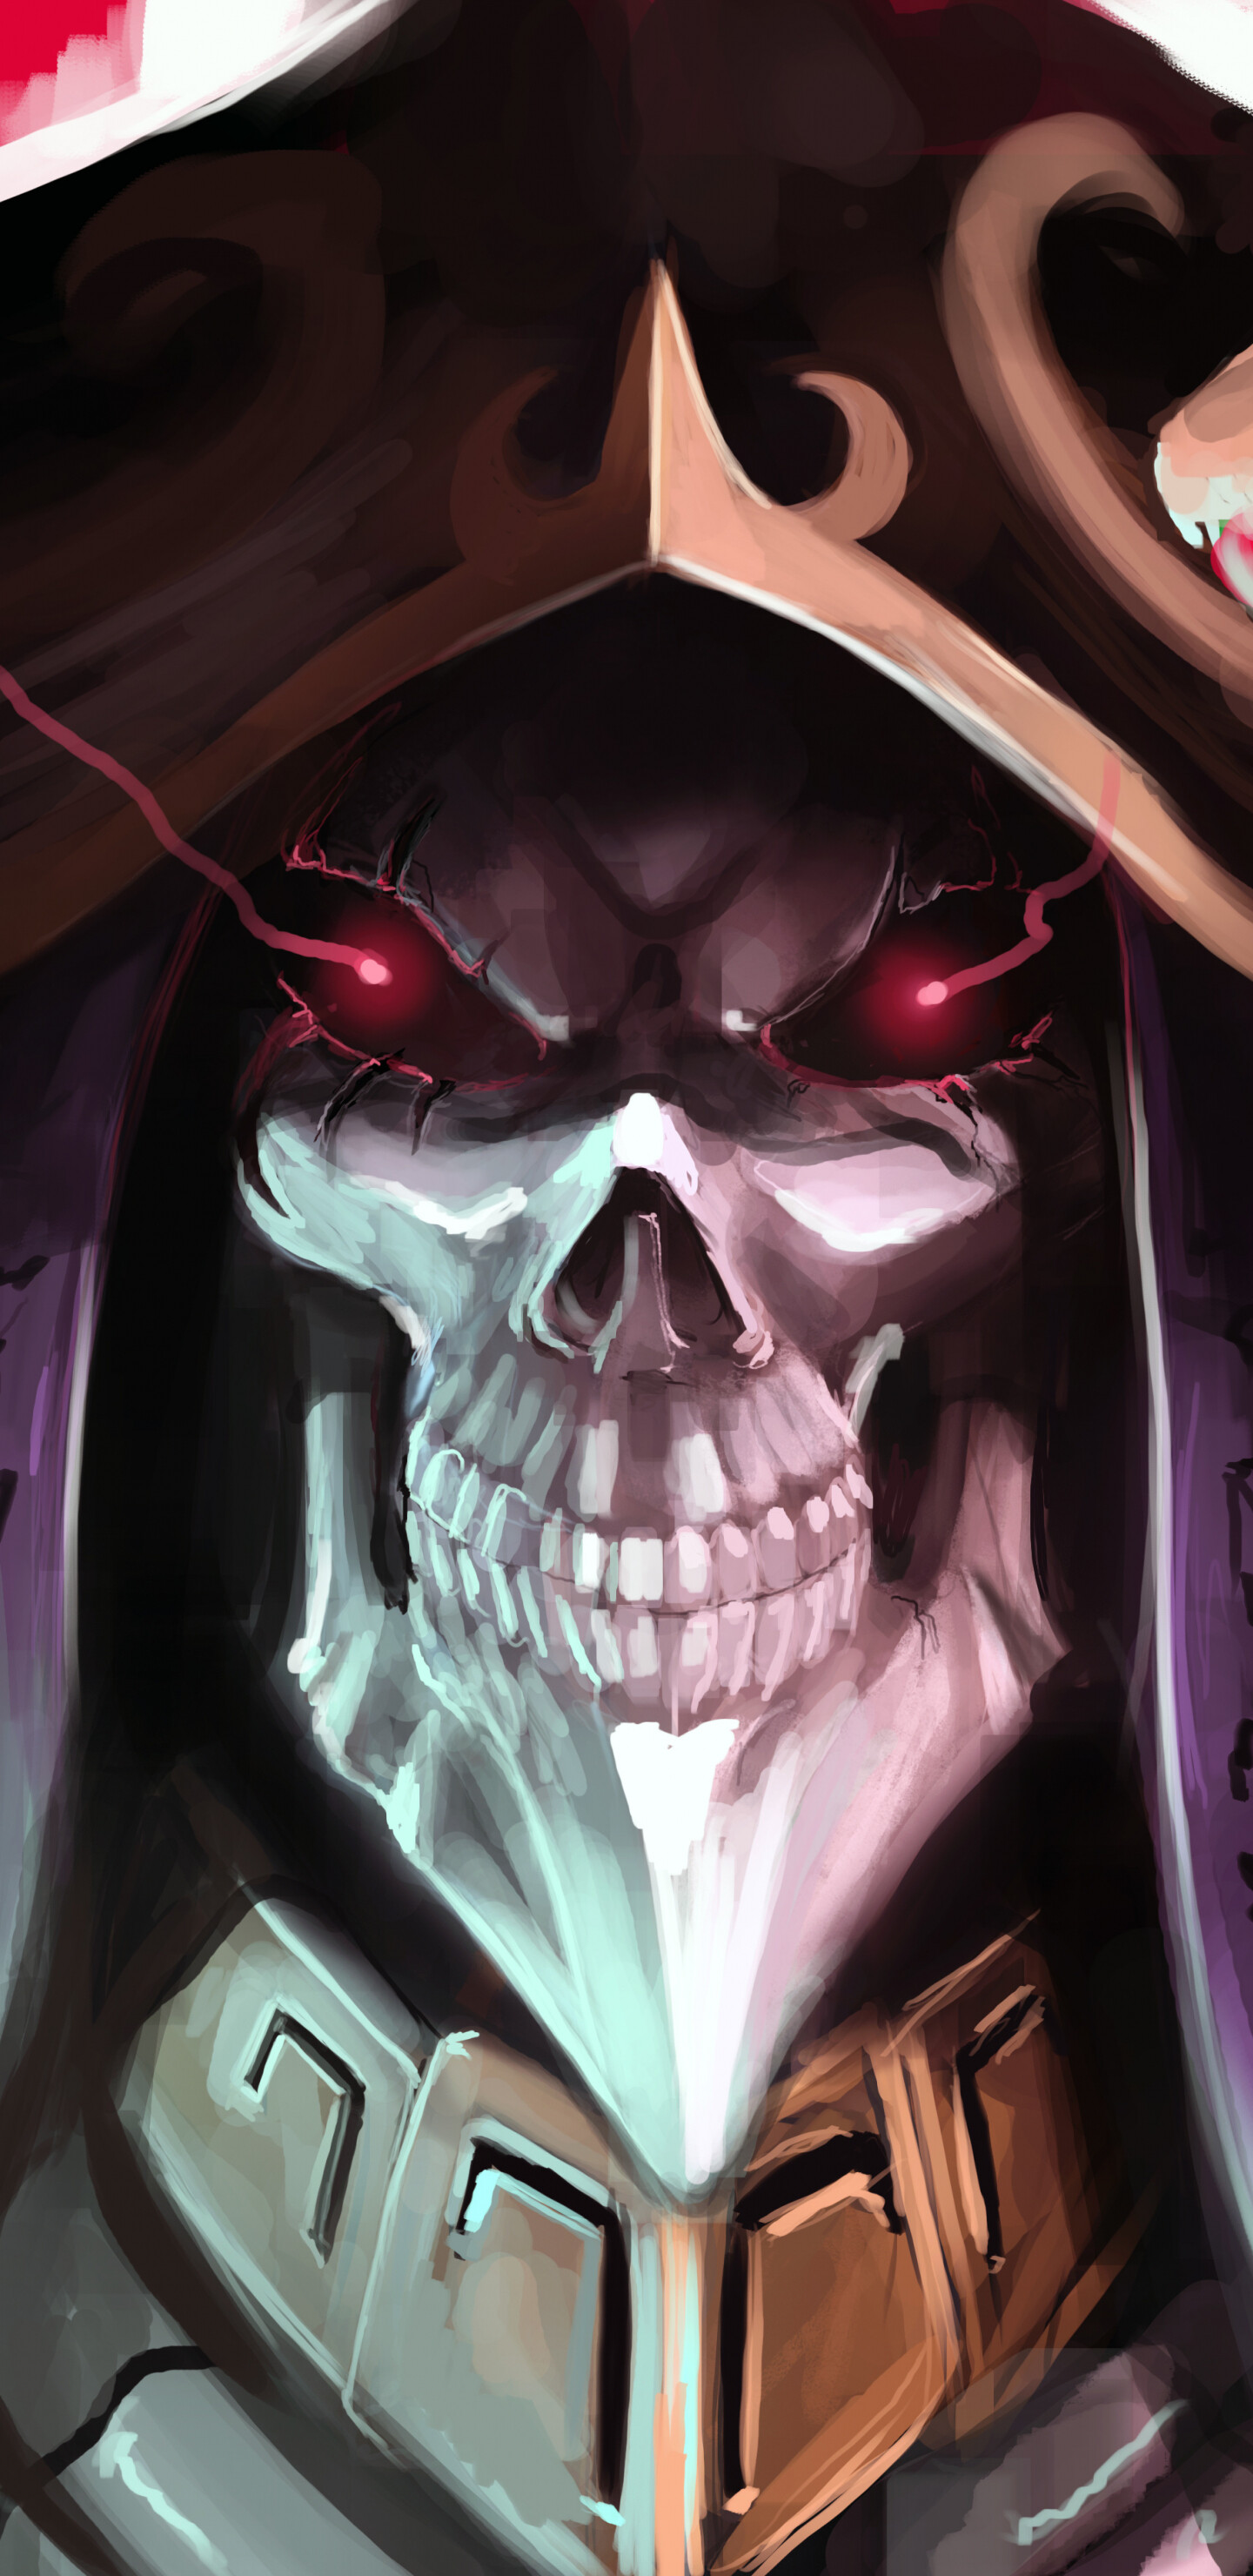 Overlord: The guildmaster of Ainz Ooal Gown, The creator of Pandora's Actor. 1440x2960 HD Wallpaper.